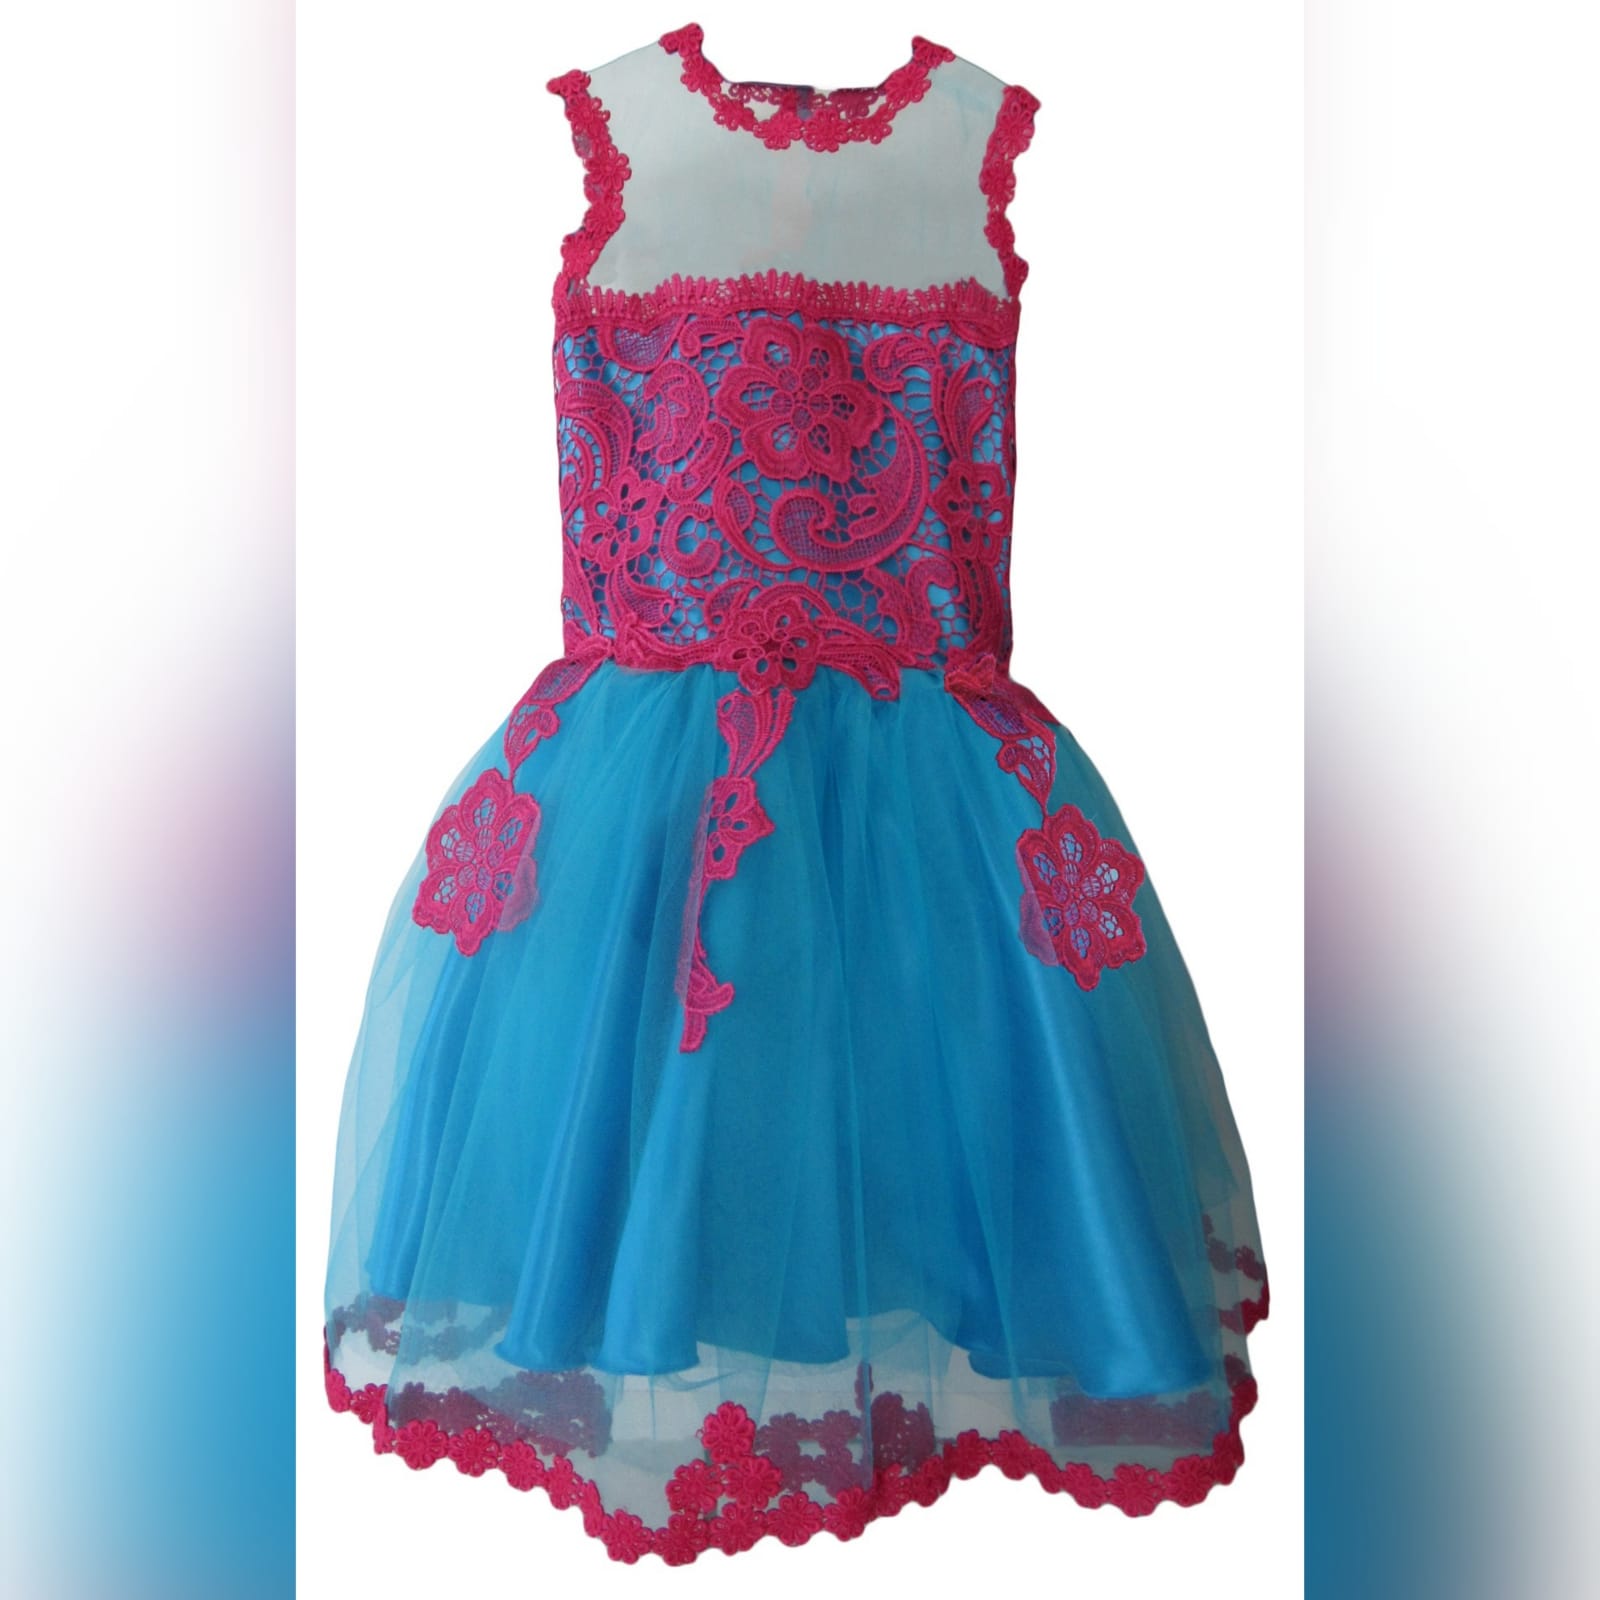 Cerise pink lace and turquoise girls evening dress 6 cerise pink lace and turquoise girls evening dress with a lace bodice. Bottom detailed in lace. Evening wear for a drummies gala evening.